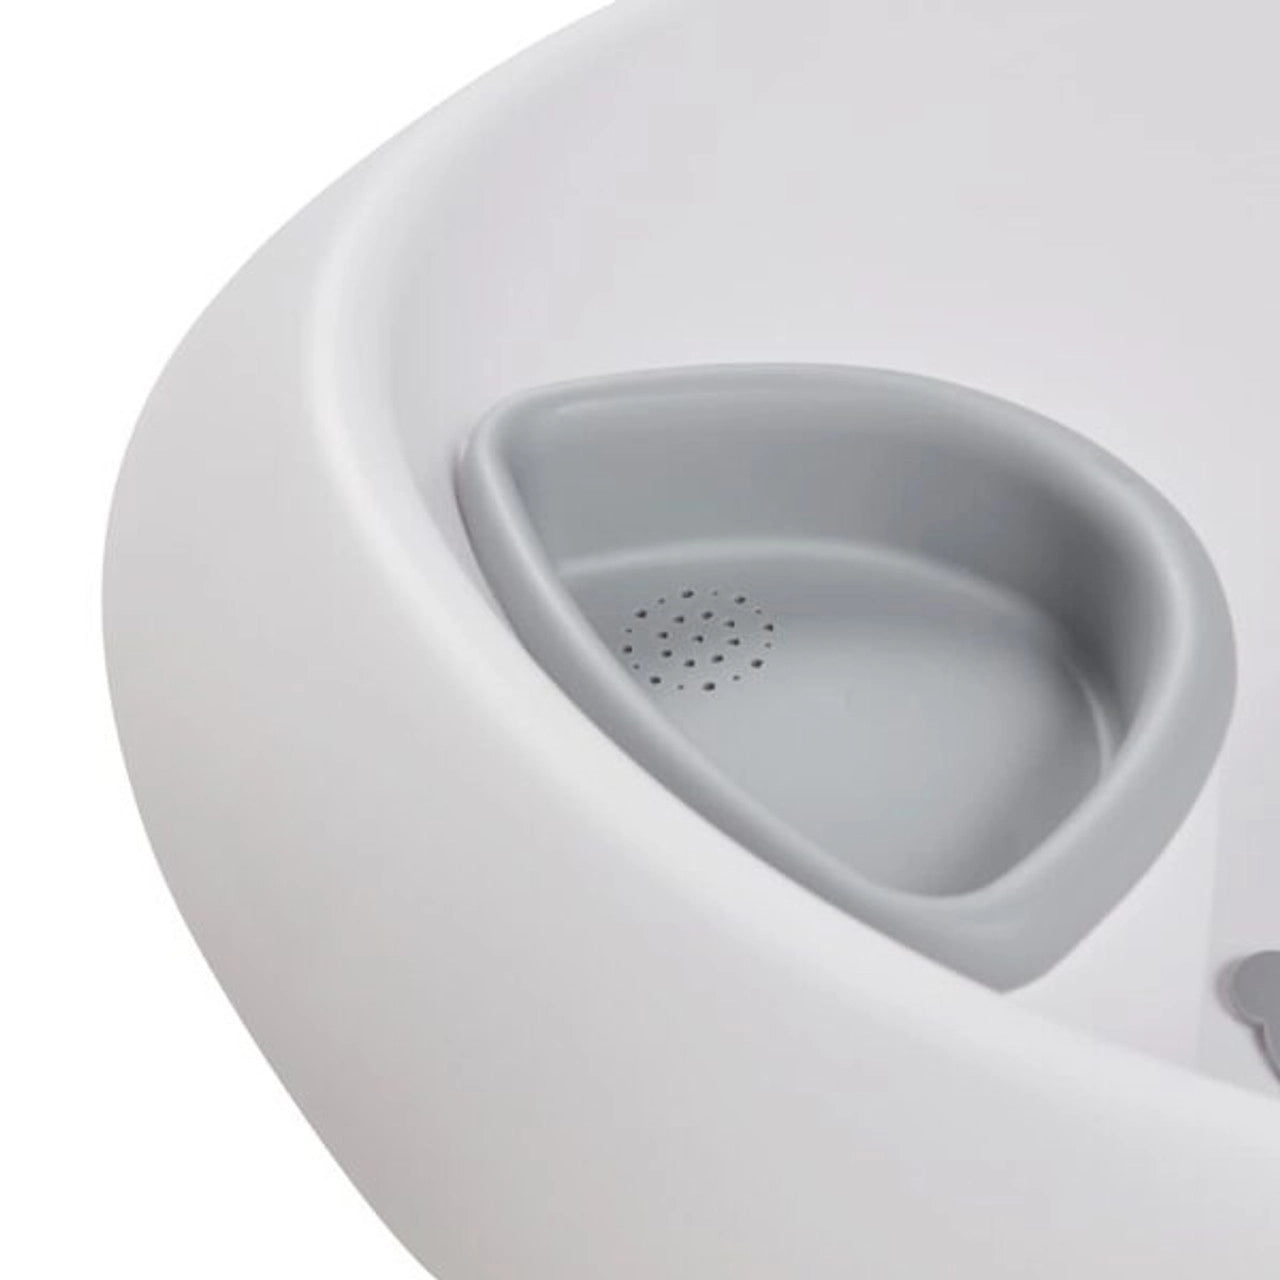 Keeper Baby Bath With Insert - White/Grey